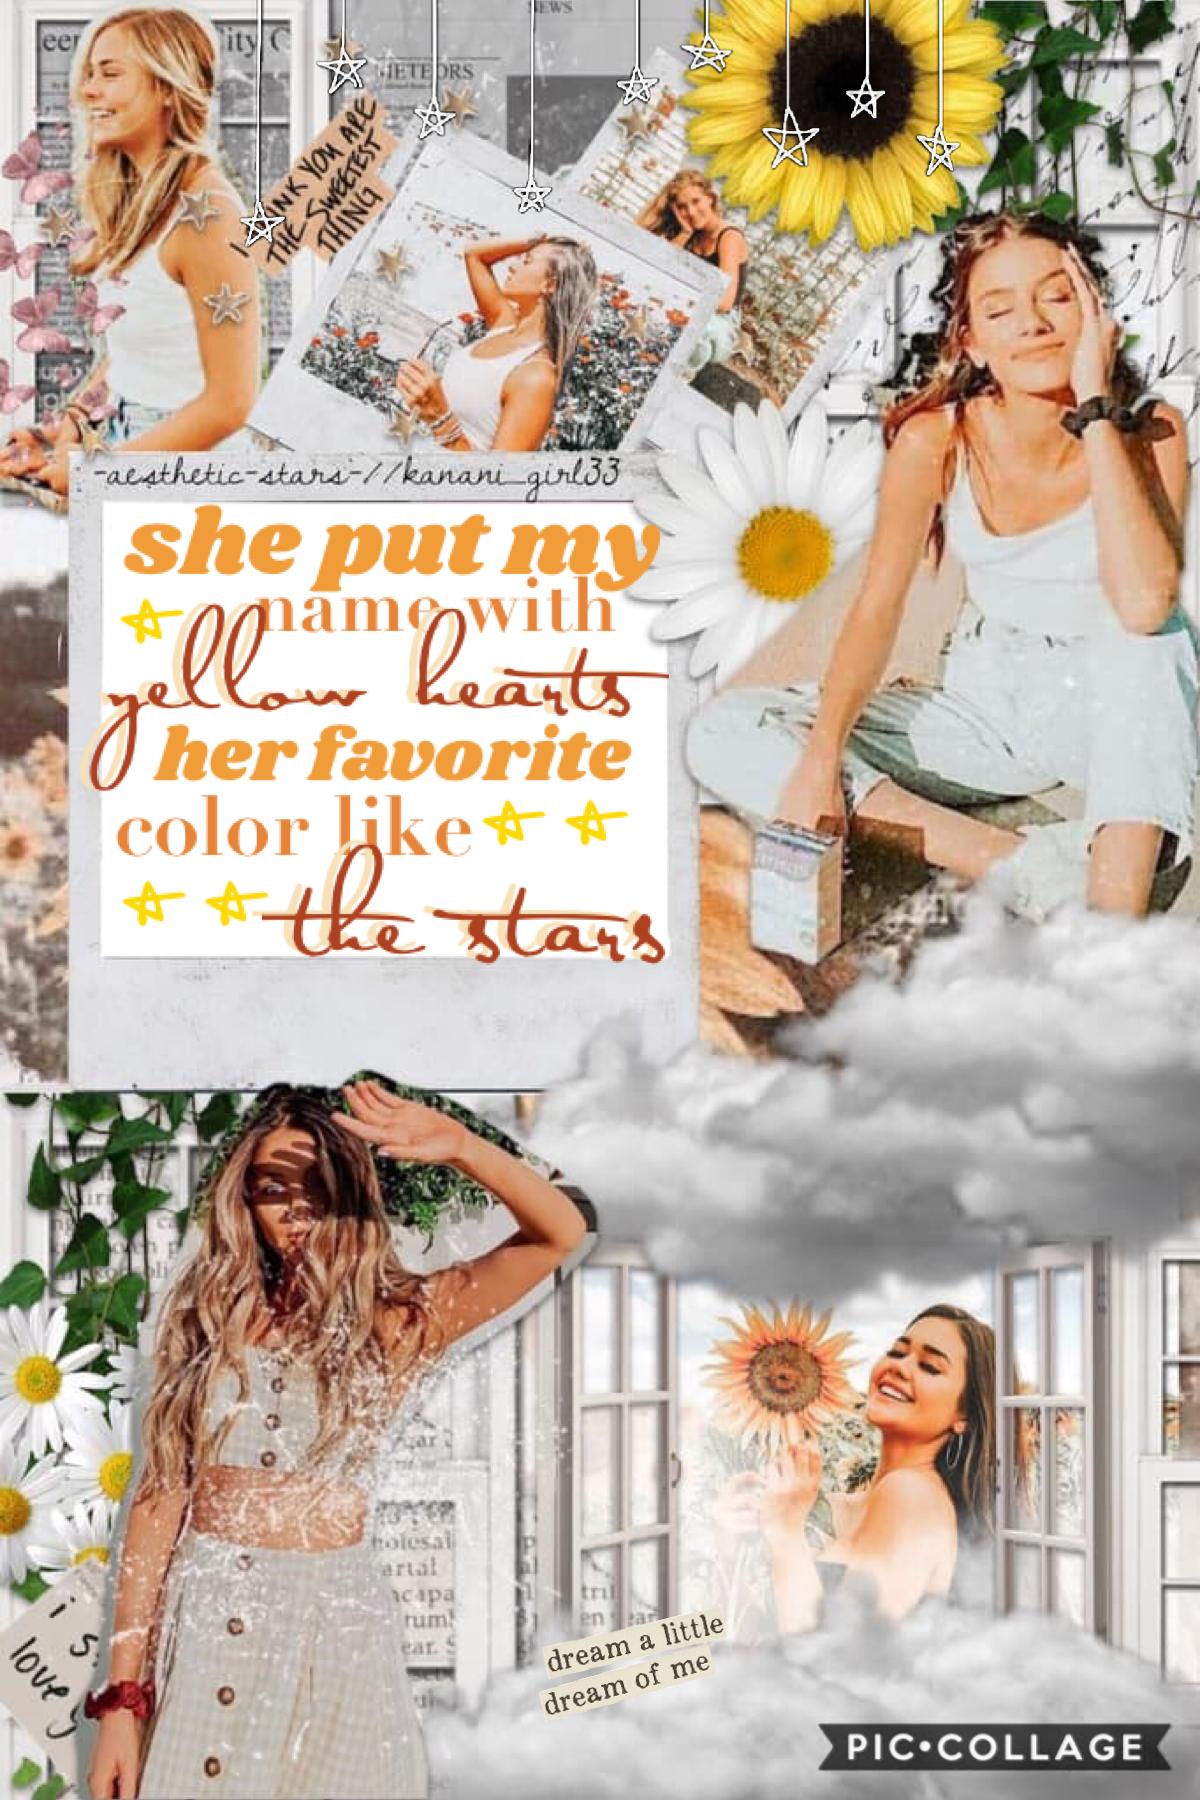 🤍tap🤍
october 24, 2020
collab with the amazing -aesthetic-stars- 🌼 she did the gorgeous background and i did the text! qotd: have you heard ariana’s new song positions? 💗 aotd: i have it on repeat.